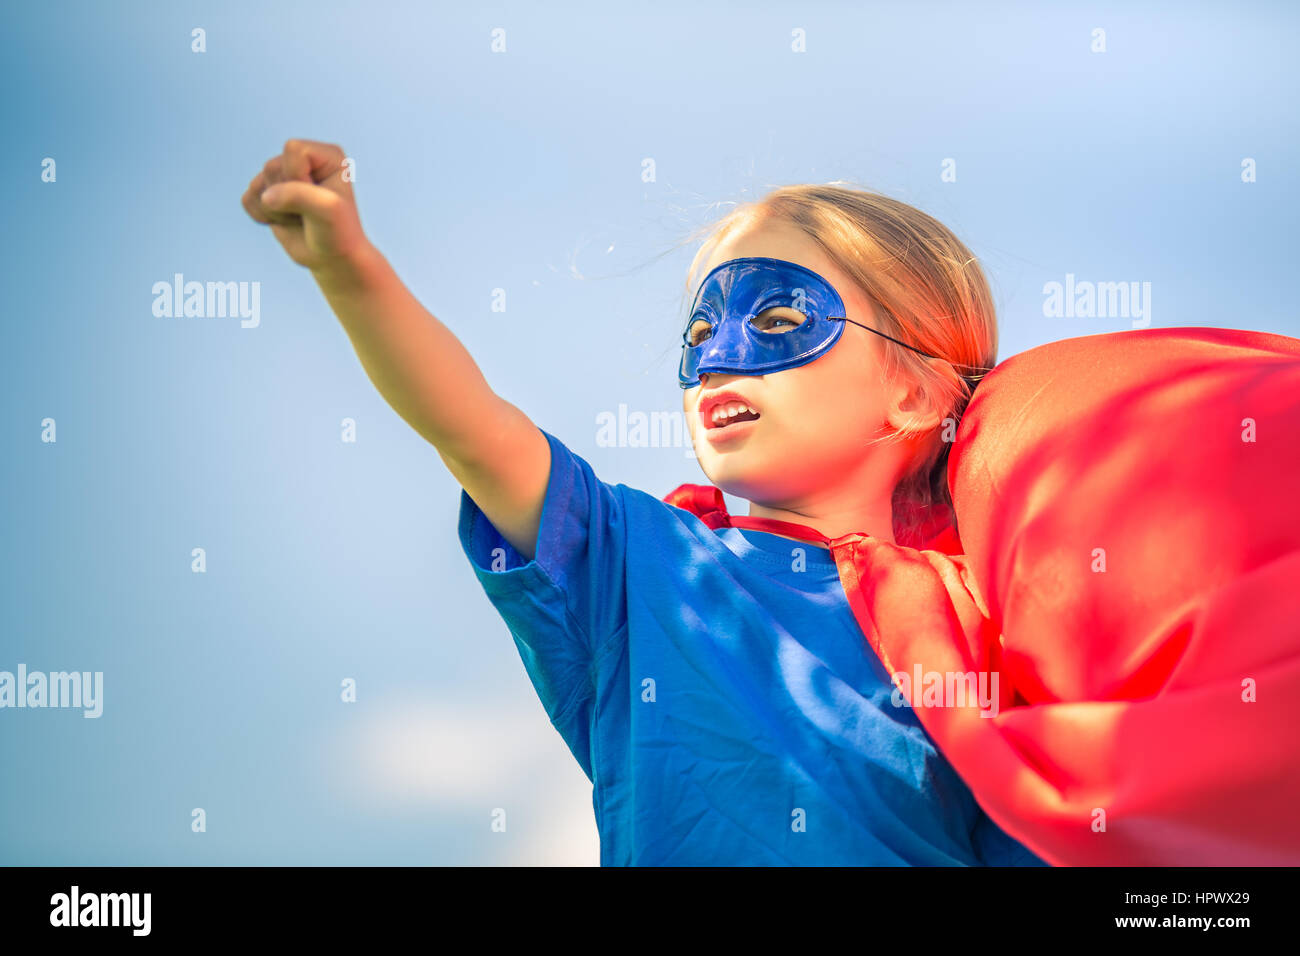 Funny little girl playing power super hero over blue sky background. Superhero concept. Stock Photo